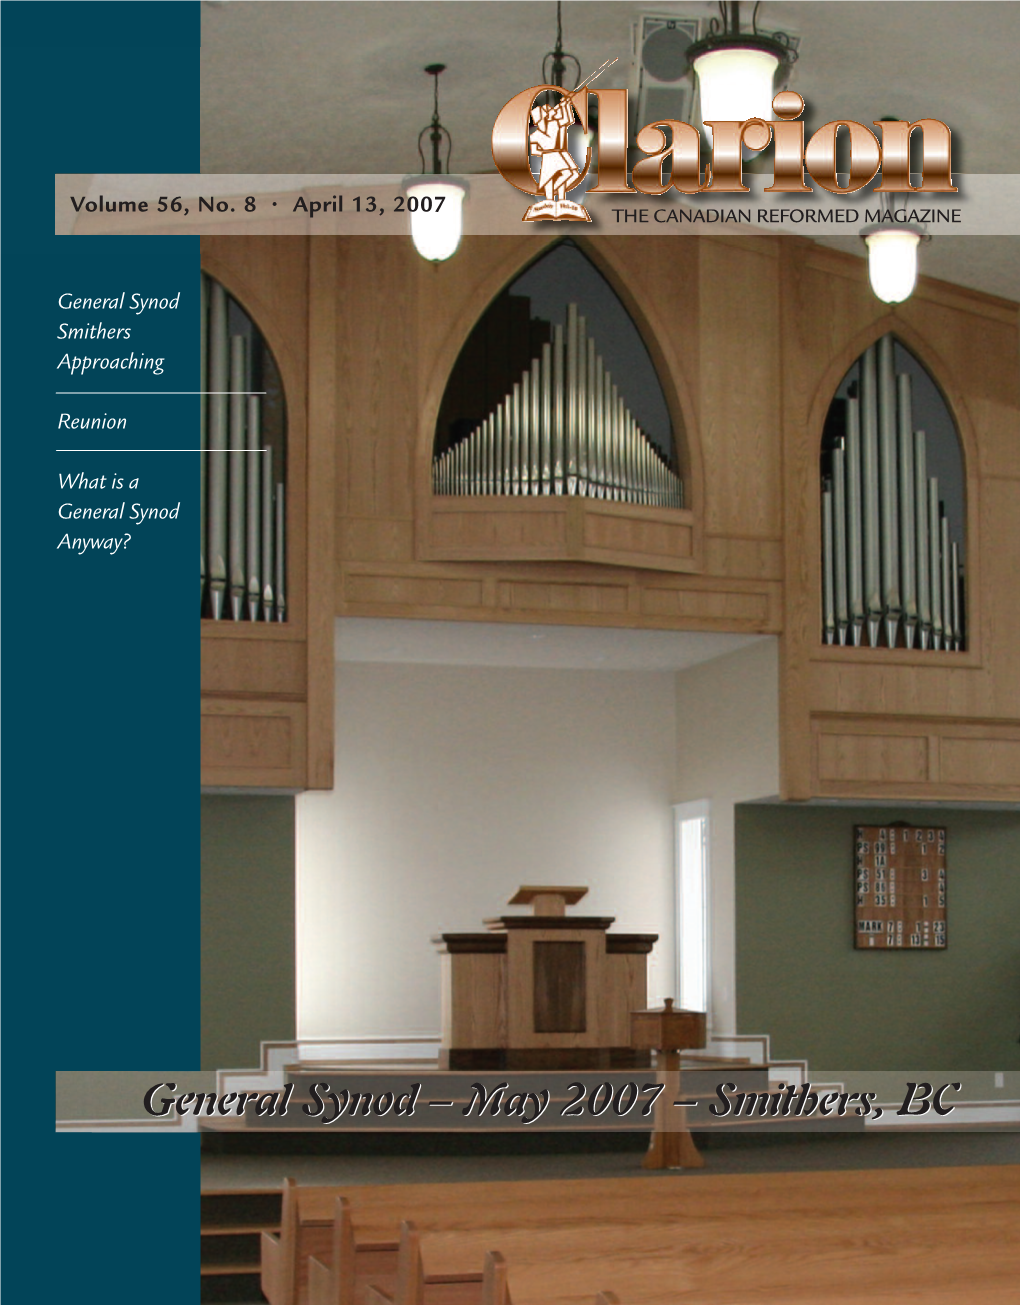 April 13, 2007 the CANADIAN REFORMED MAGAZINE